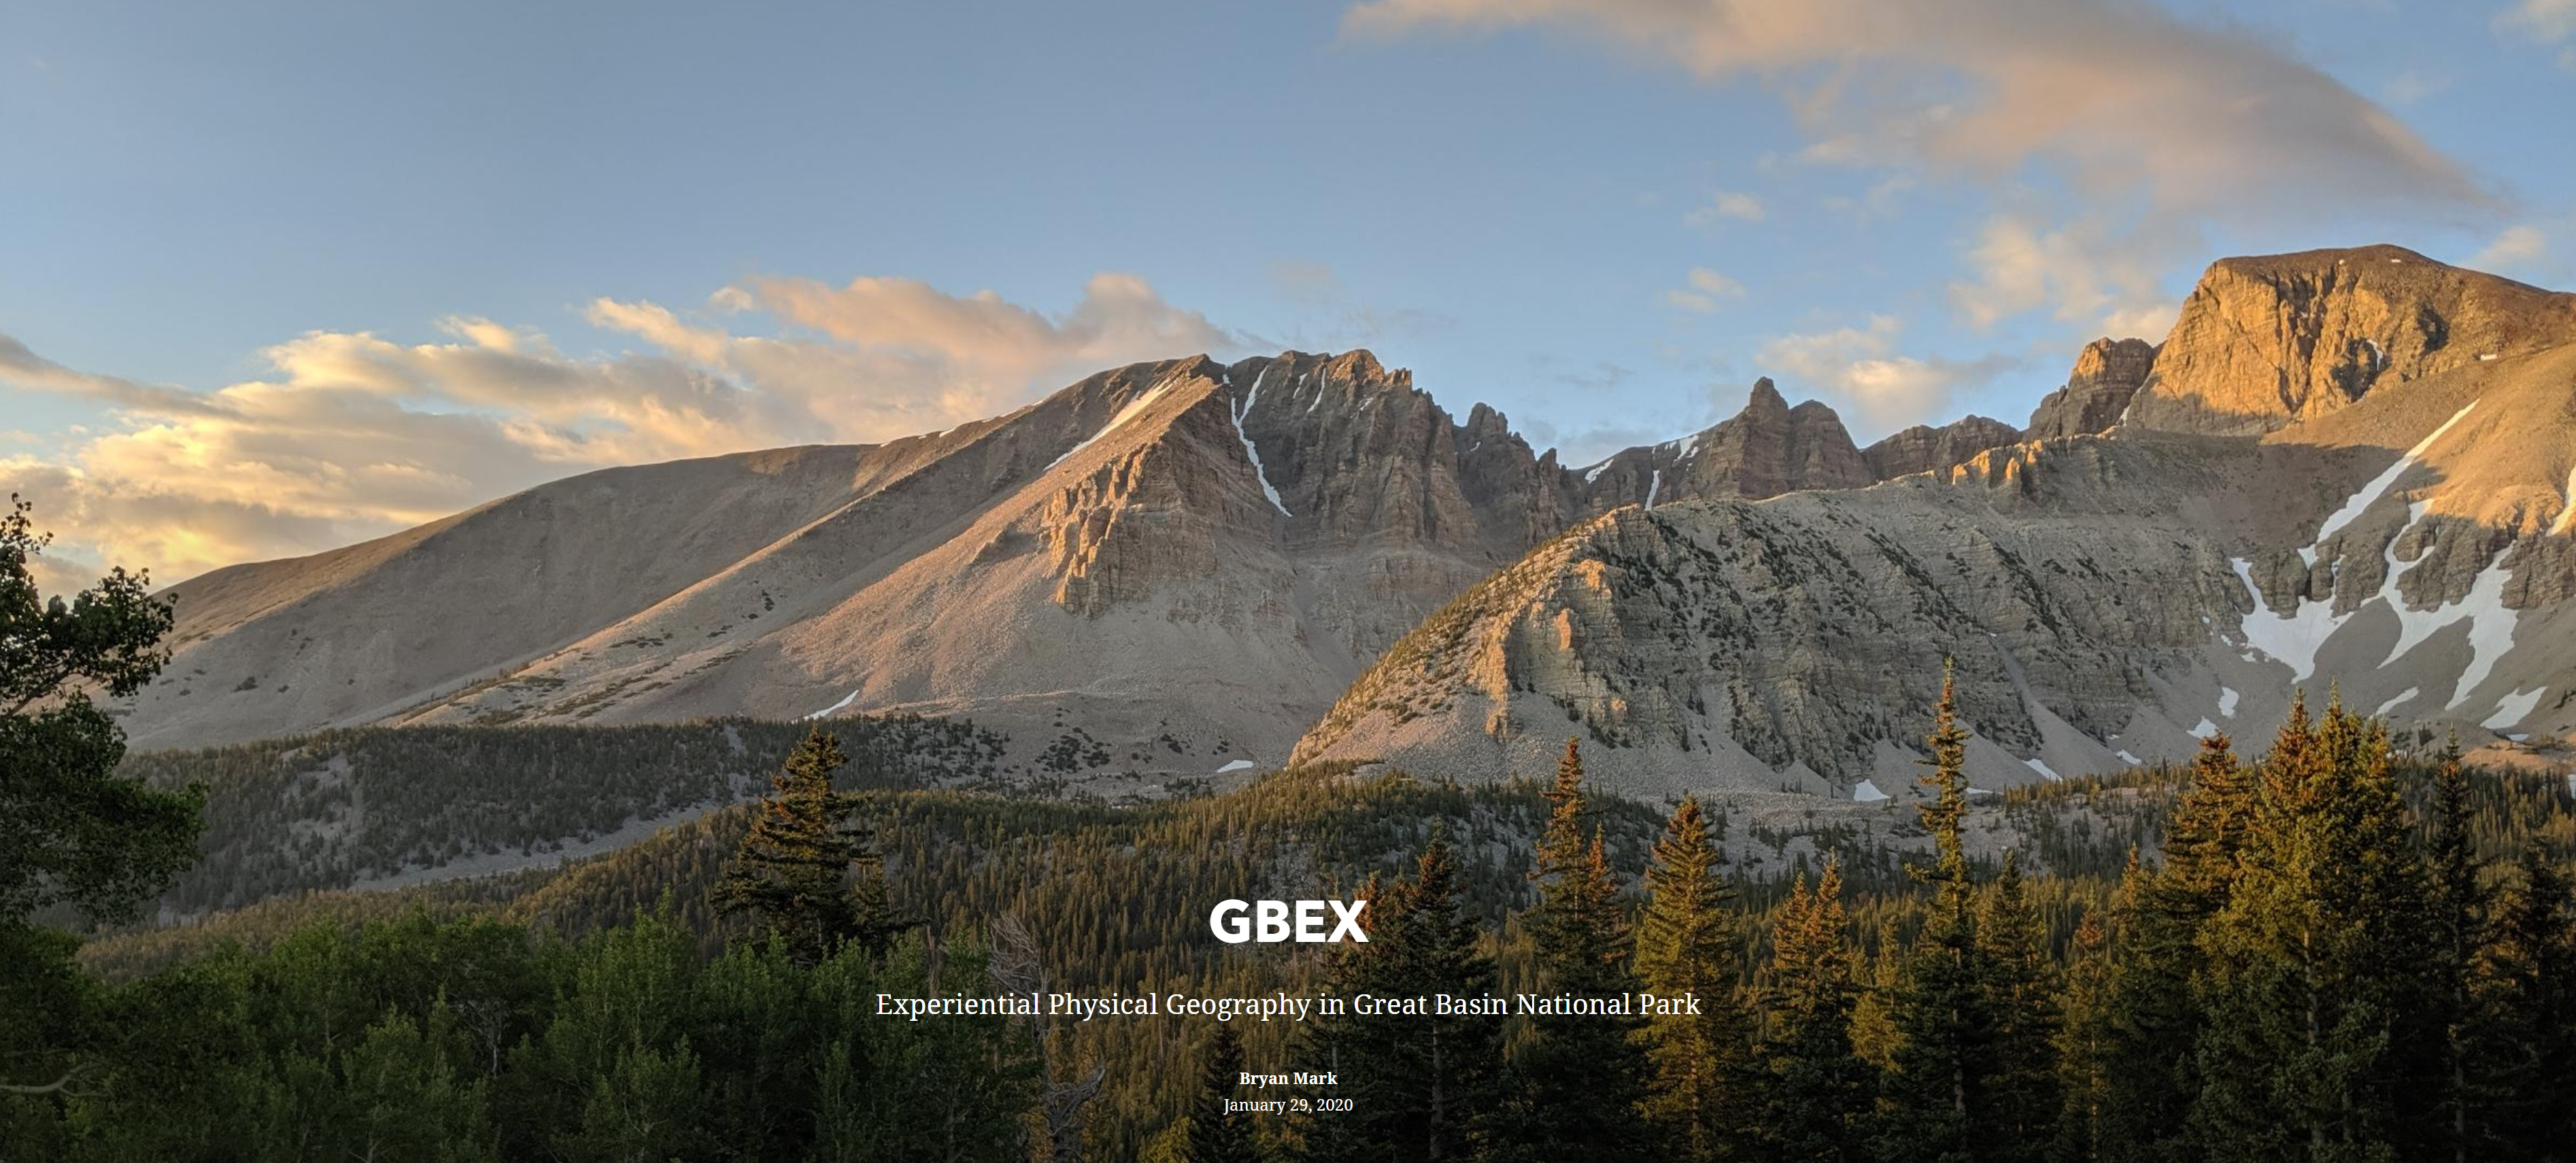 A valley surrounded by mountains with snow patches and pine trees under blue skies and white clouds with text: GBEX Experiential Physical Geography in Great Basin National Park  Bryan Mark  January 29, 2020